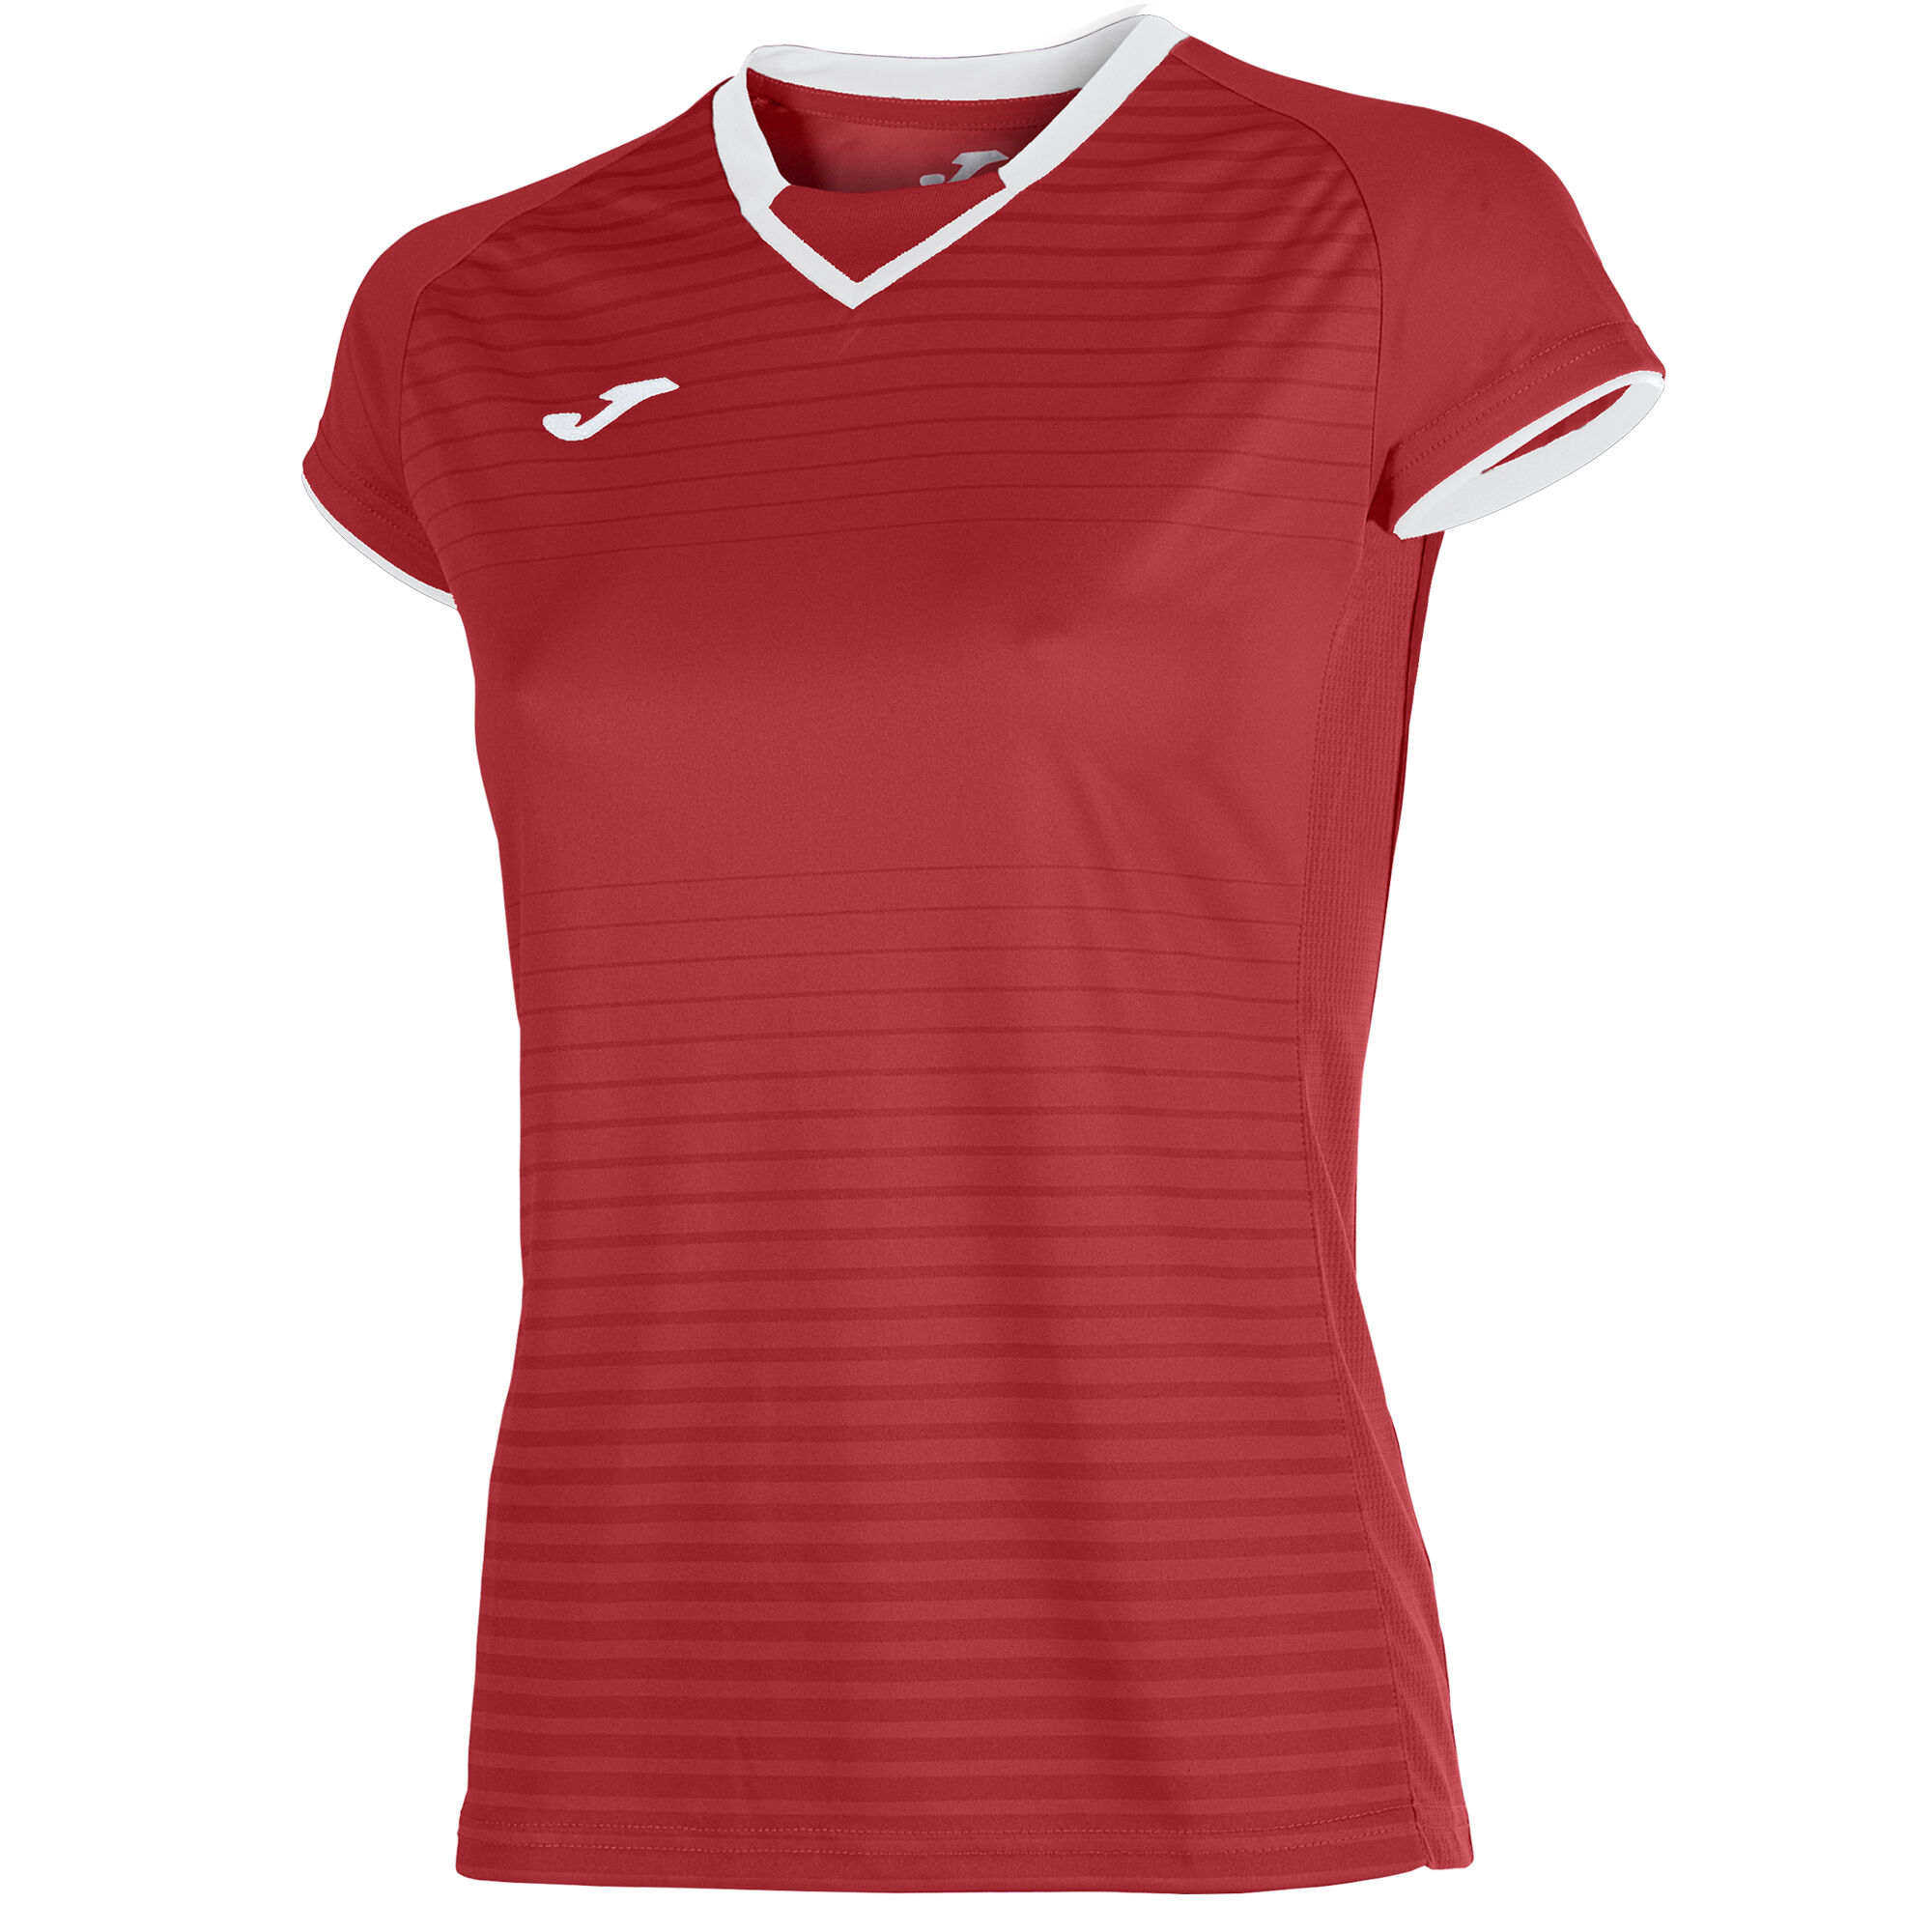 Maillot manches courtes femme Galaxy rouge